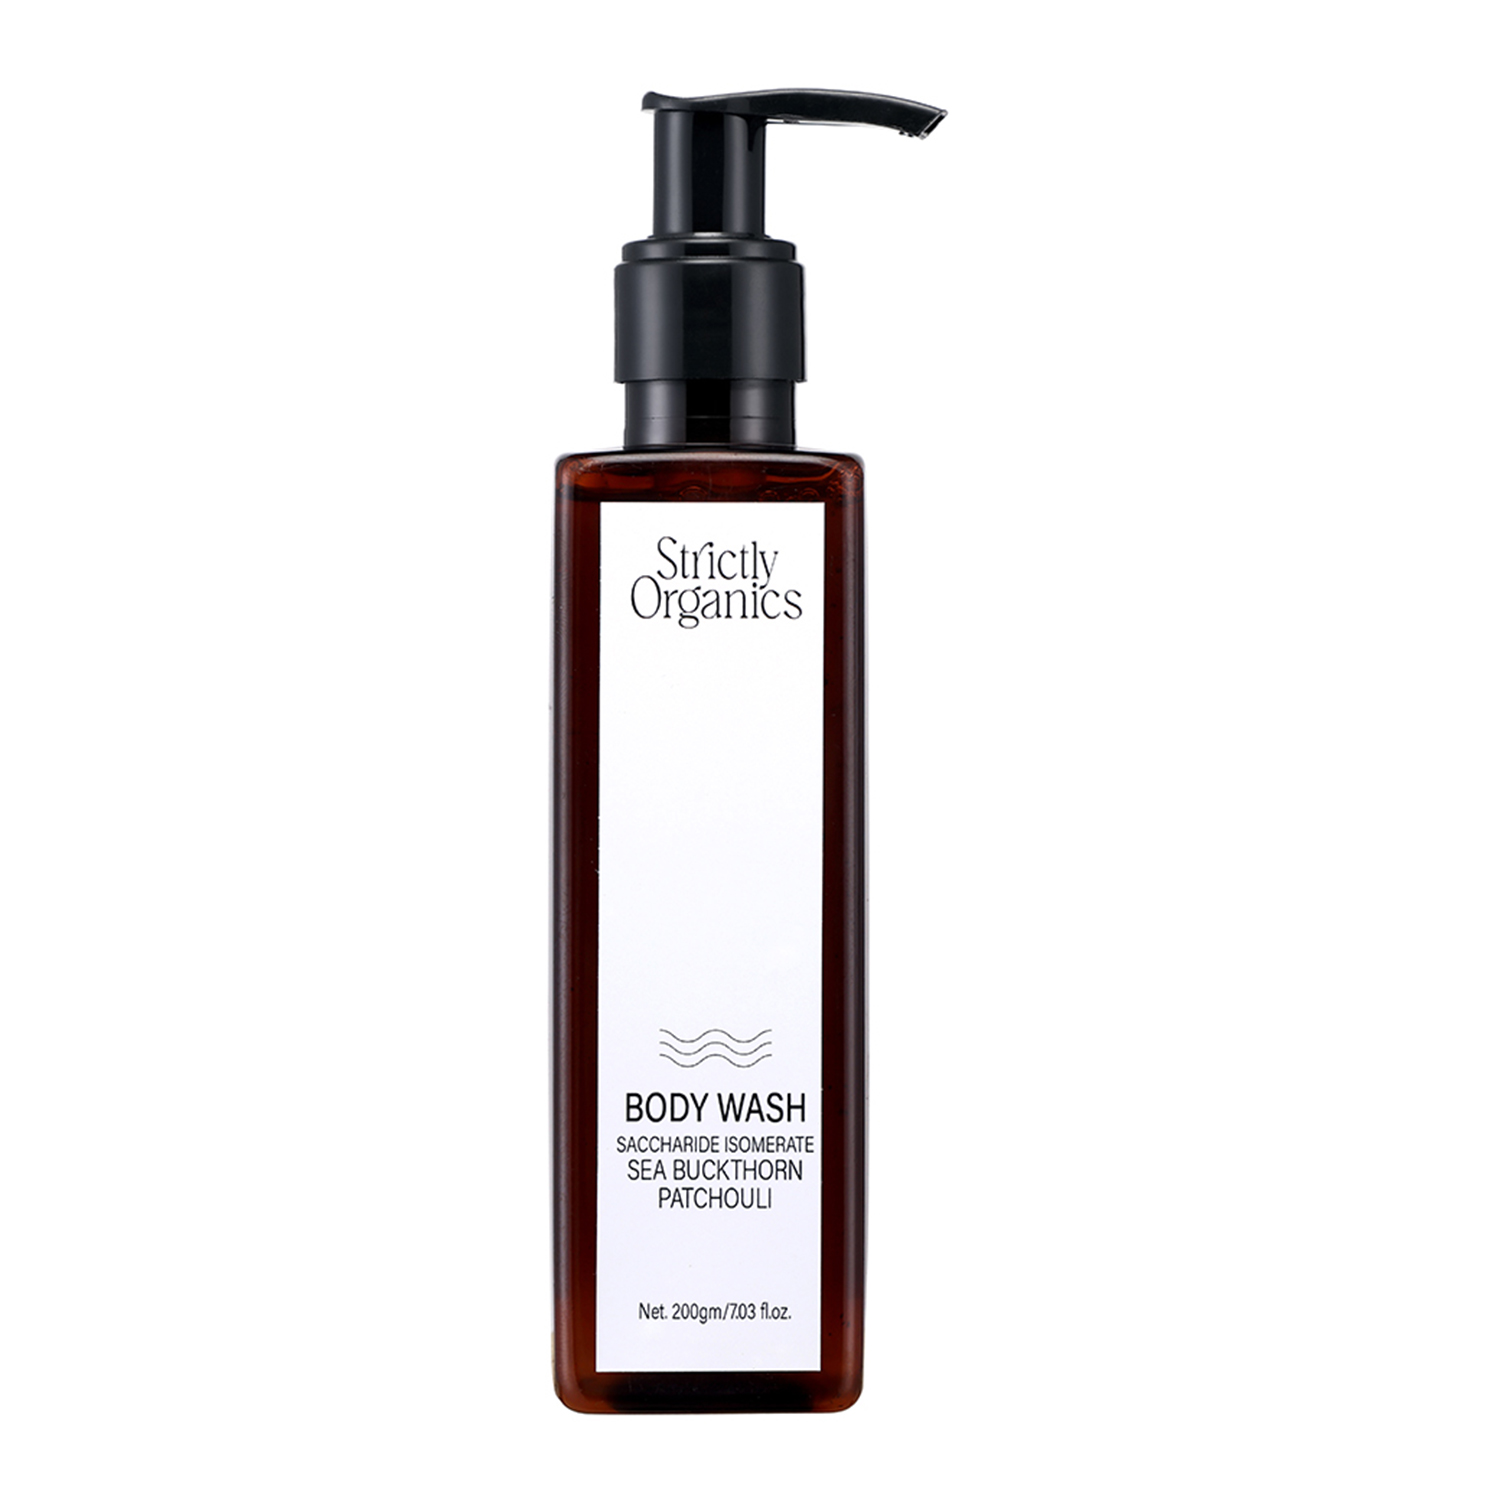 Product: Sea Buckthorn & Patchouli Body Wash